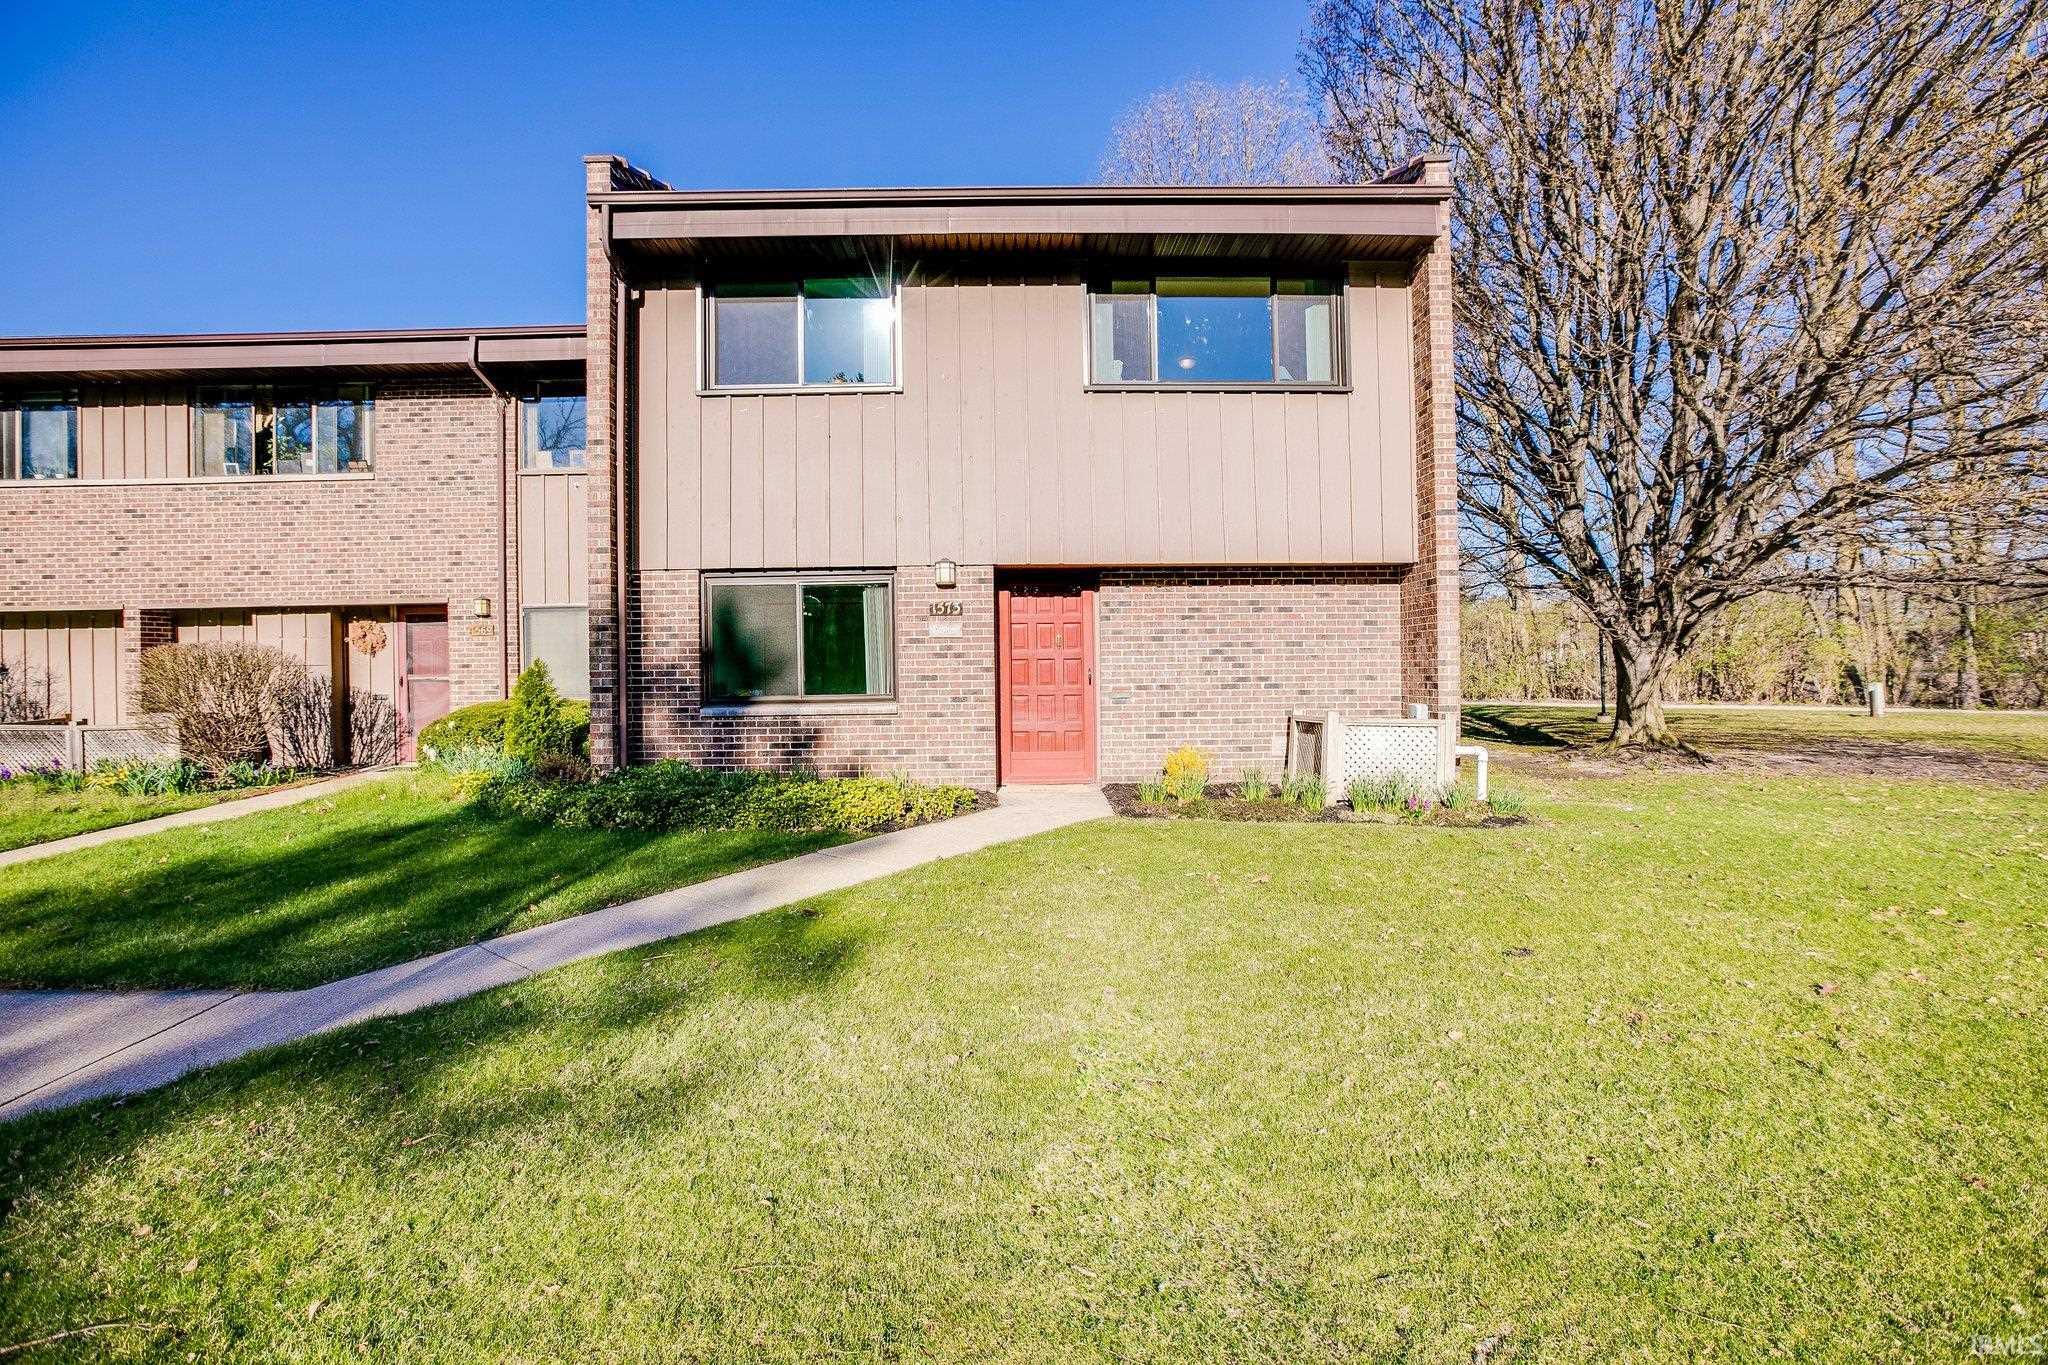 North Shore Club / Northshore Cl in South Bend | 3 Beds Residential  $199,999 MLS# 202311047 | South Bend Residential